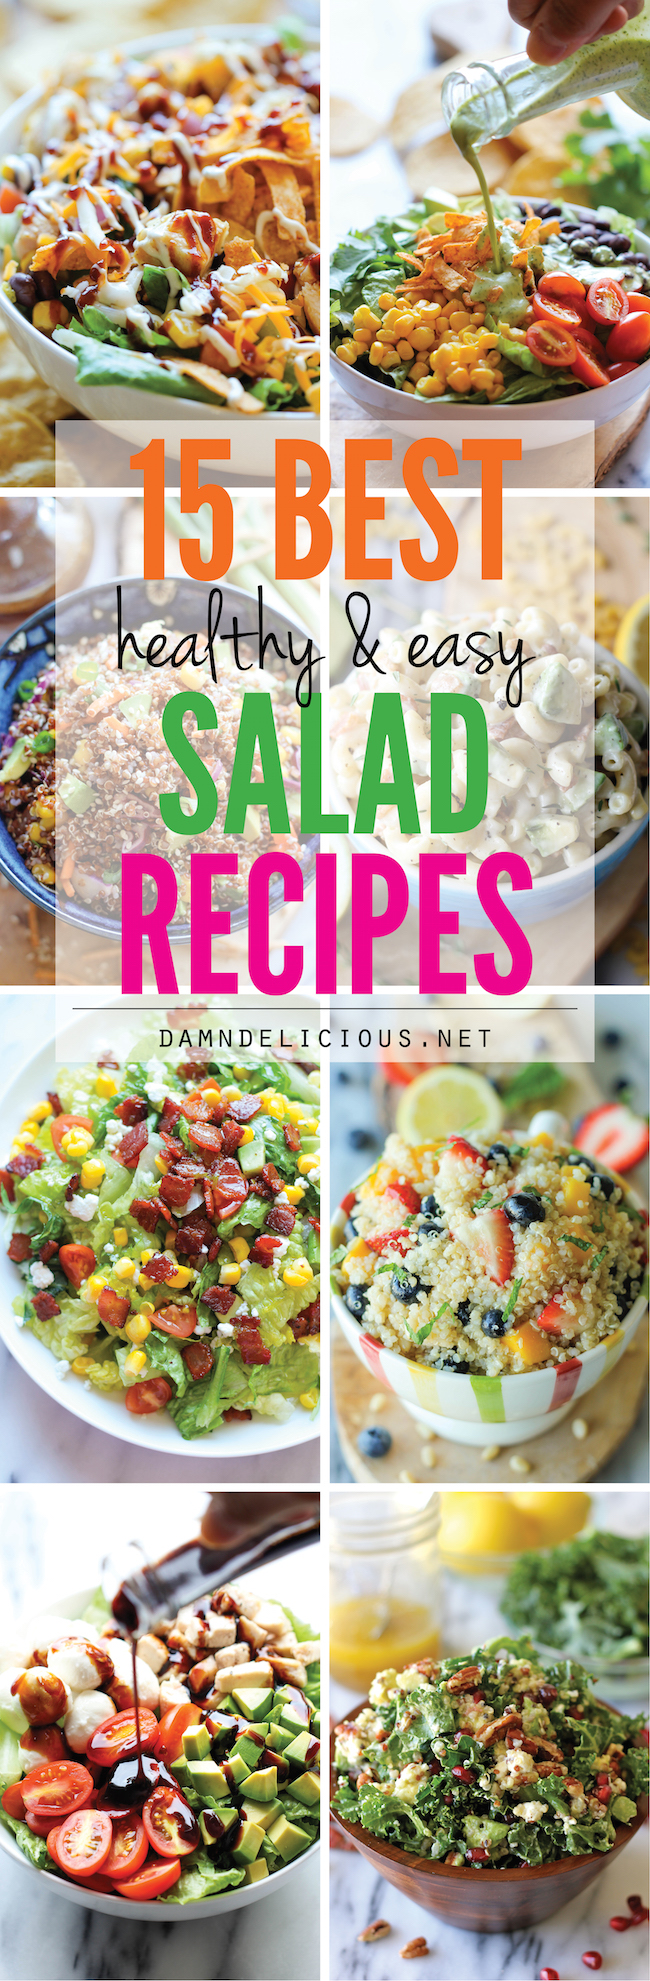 15 BEST HEALTHY AND EASY SALAD RECIPES